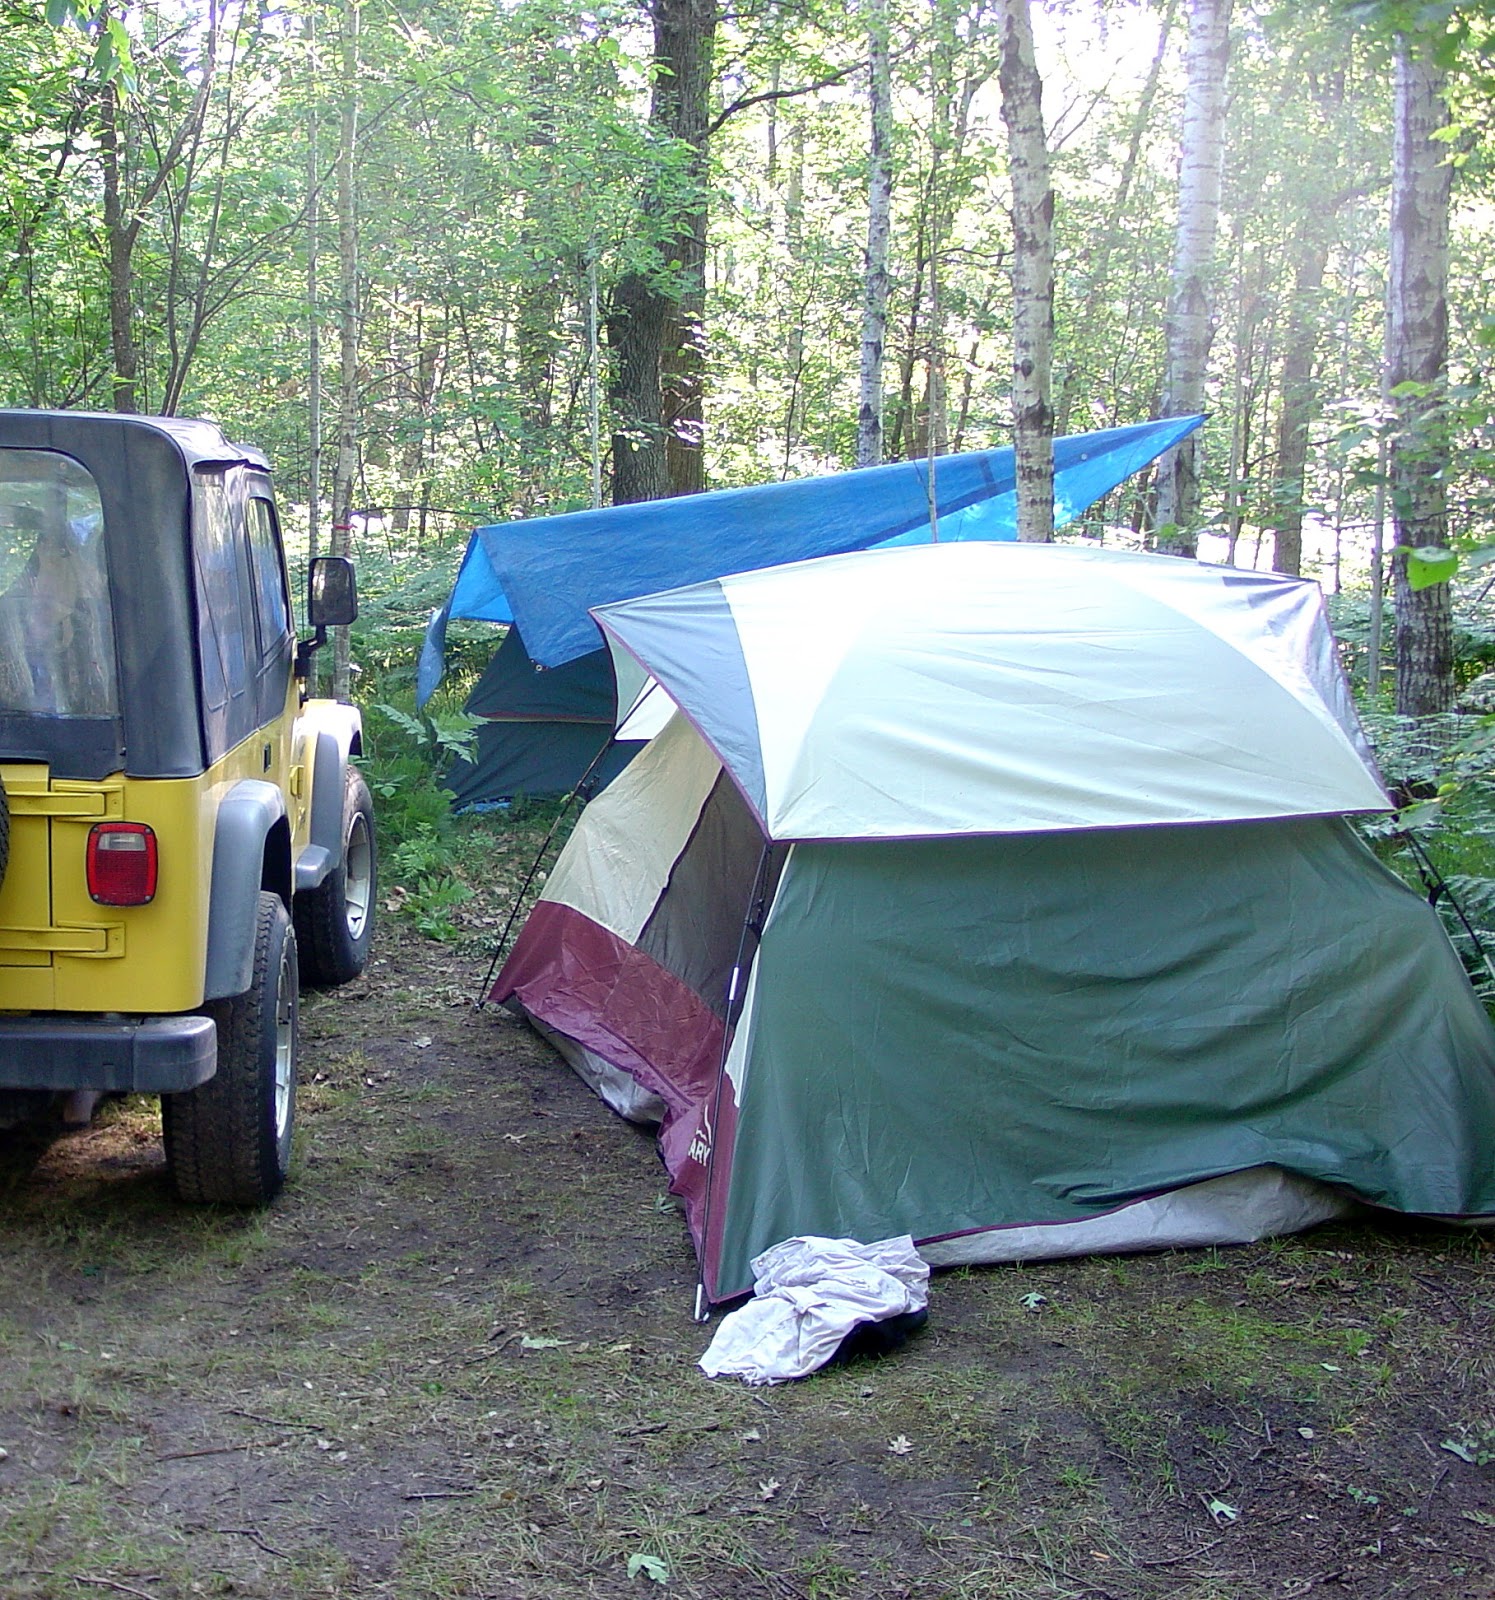 Consider Modifying Your Vehicle to make camping easier and more convenient